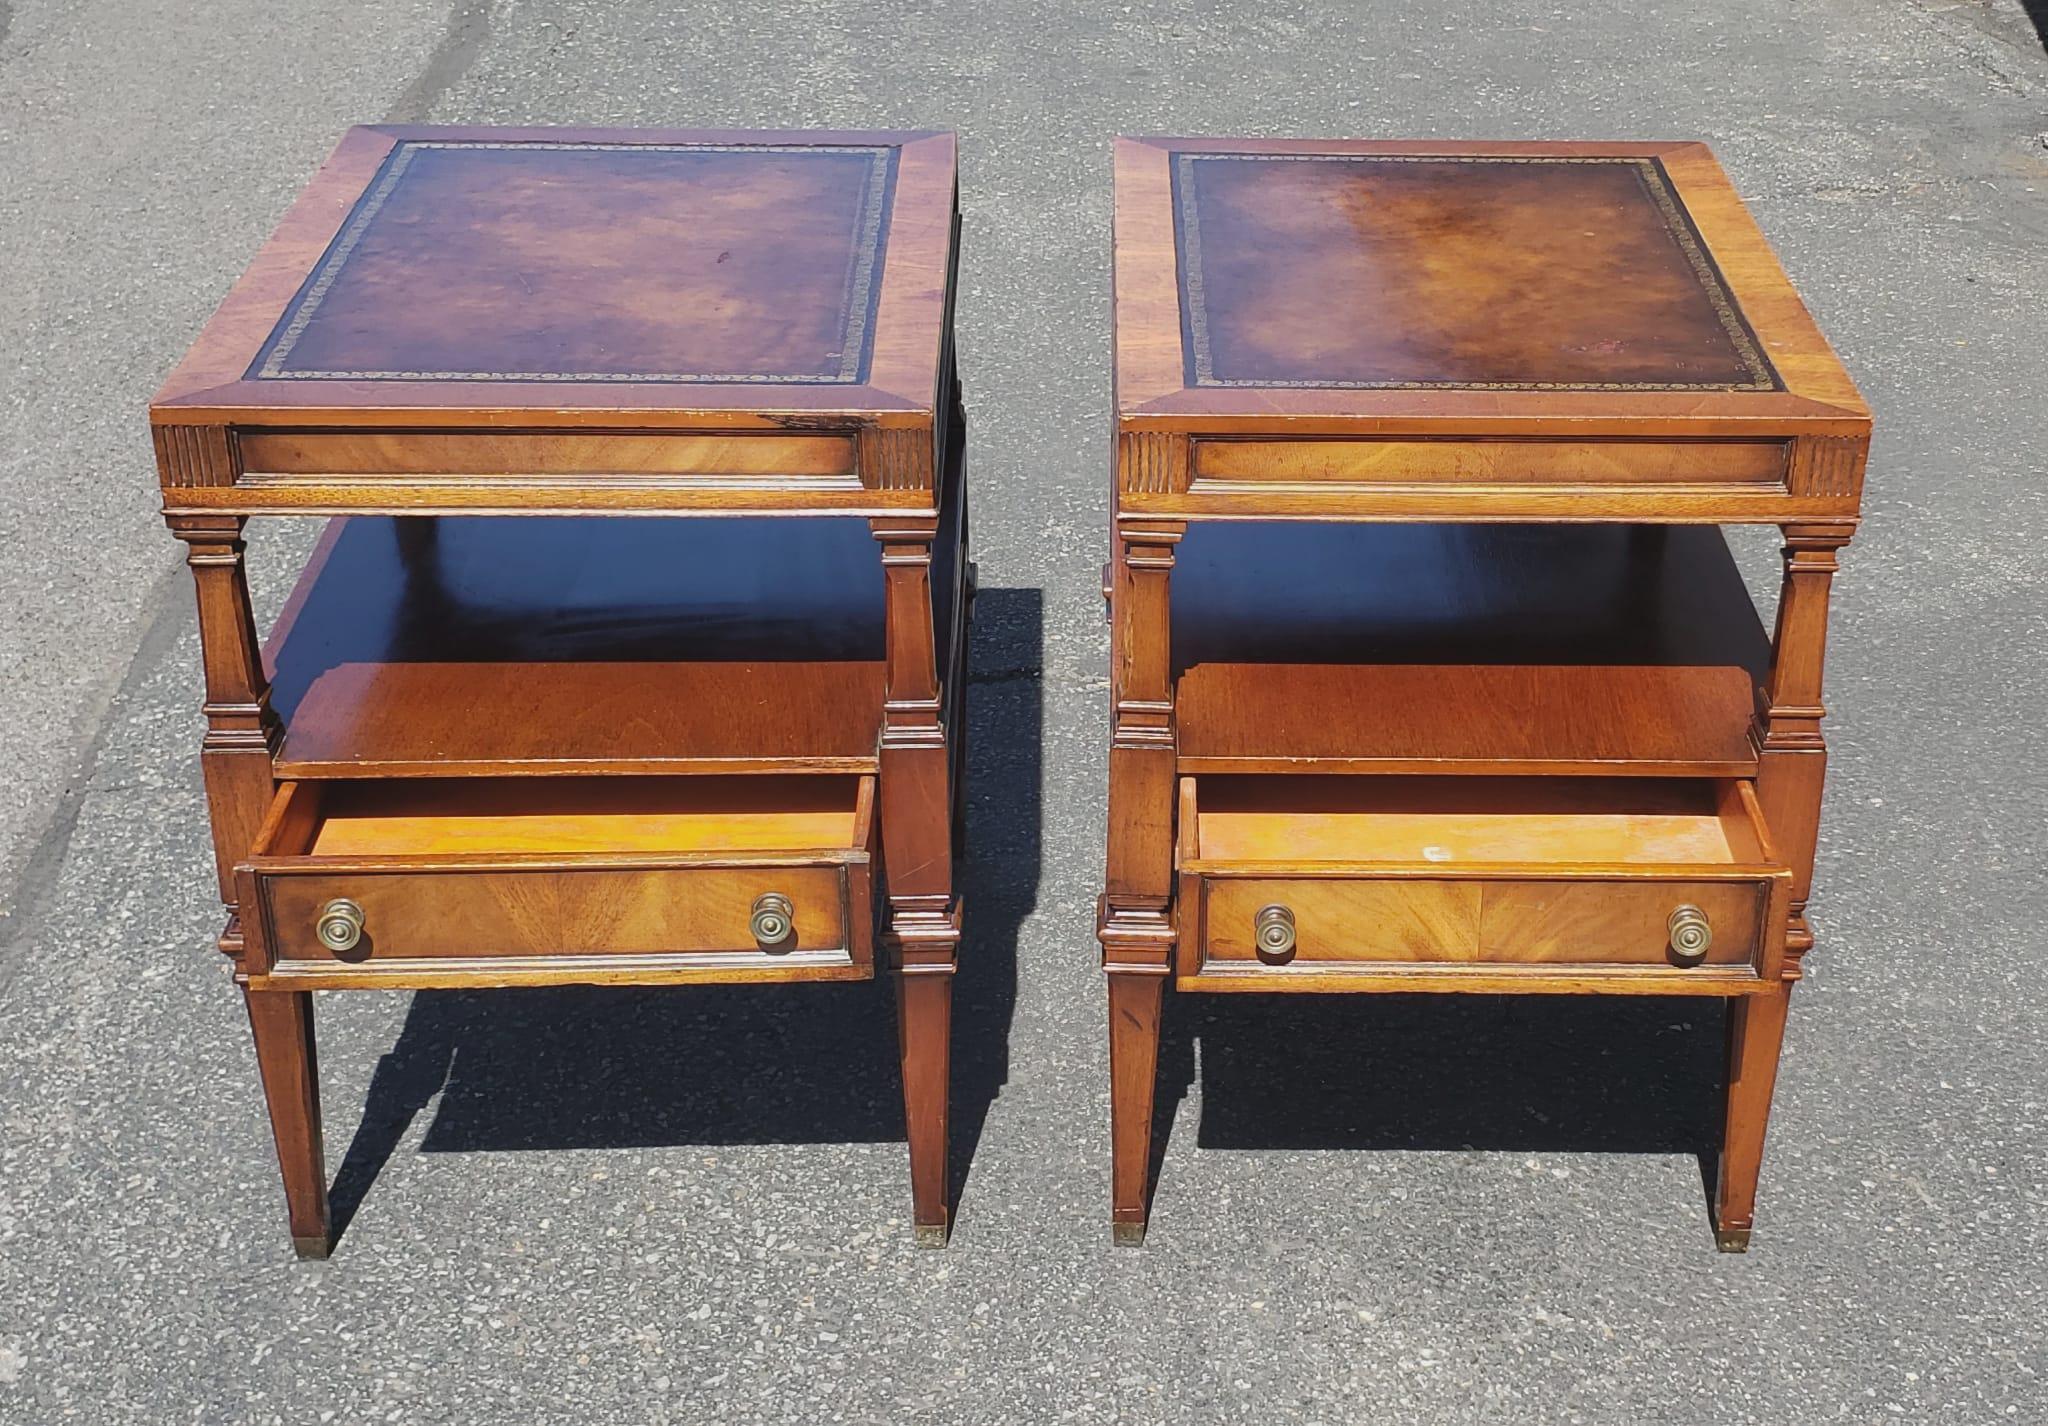 1960s Weiman Heirloom Tiered Mahogany and Tooled Leather top Side Tables In Good Condition For Sale In Germantown, MD